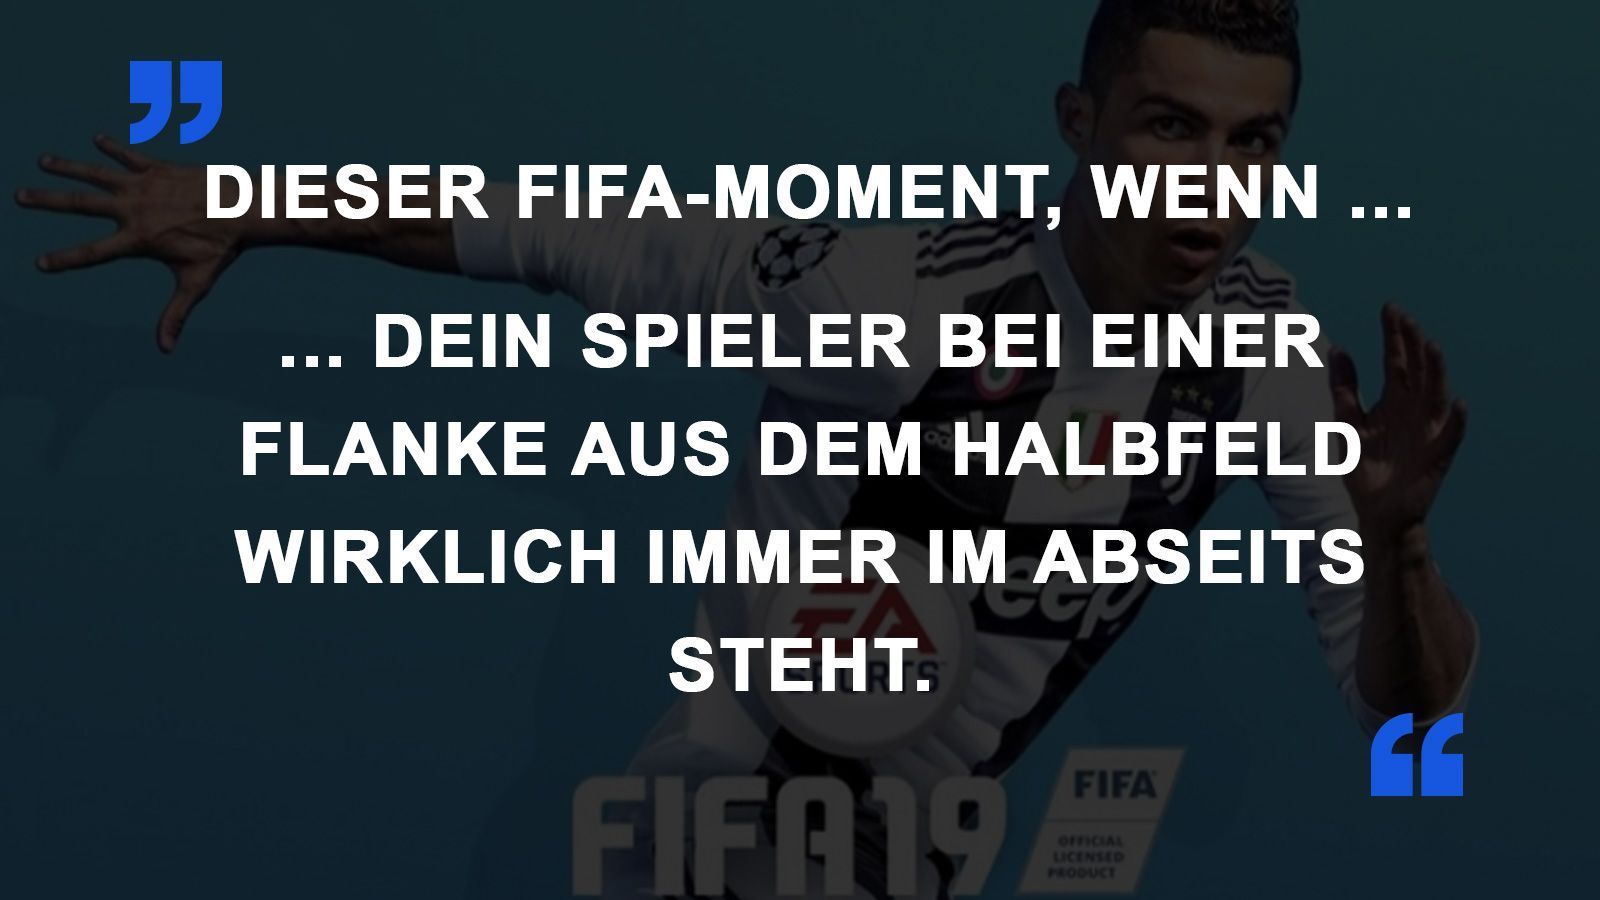 
                <strong>FIFA Momente Abseits</strong><br>
                
              